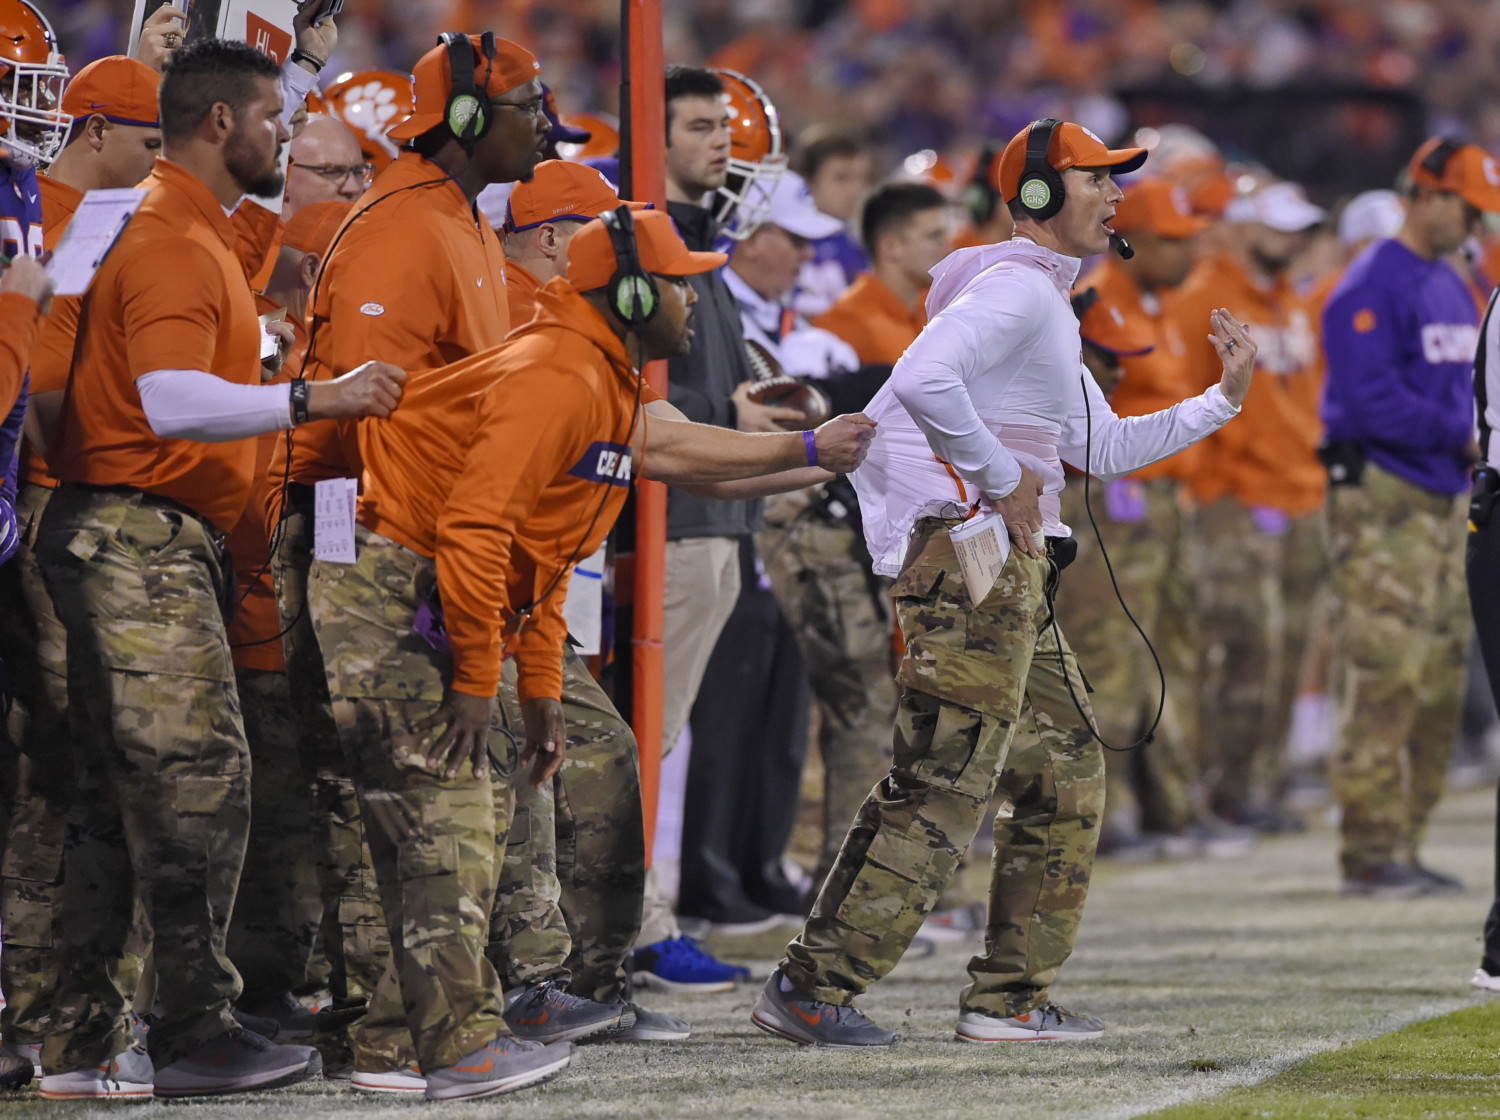 Clemson defensive coordinator Brent Venables is pulled back to the sideline by a get-back coach.